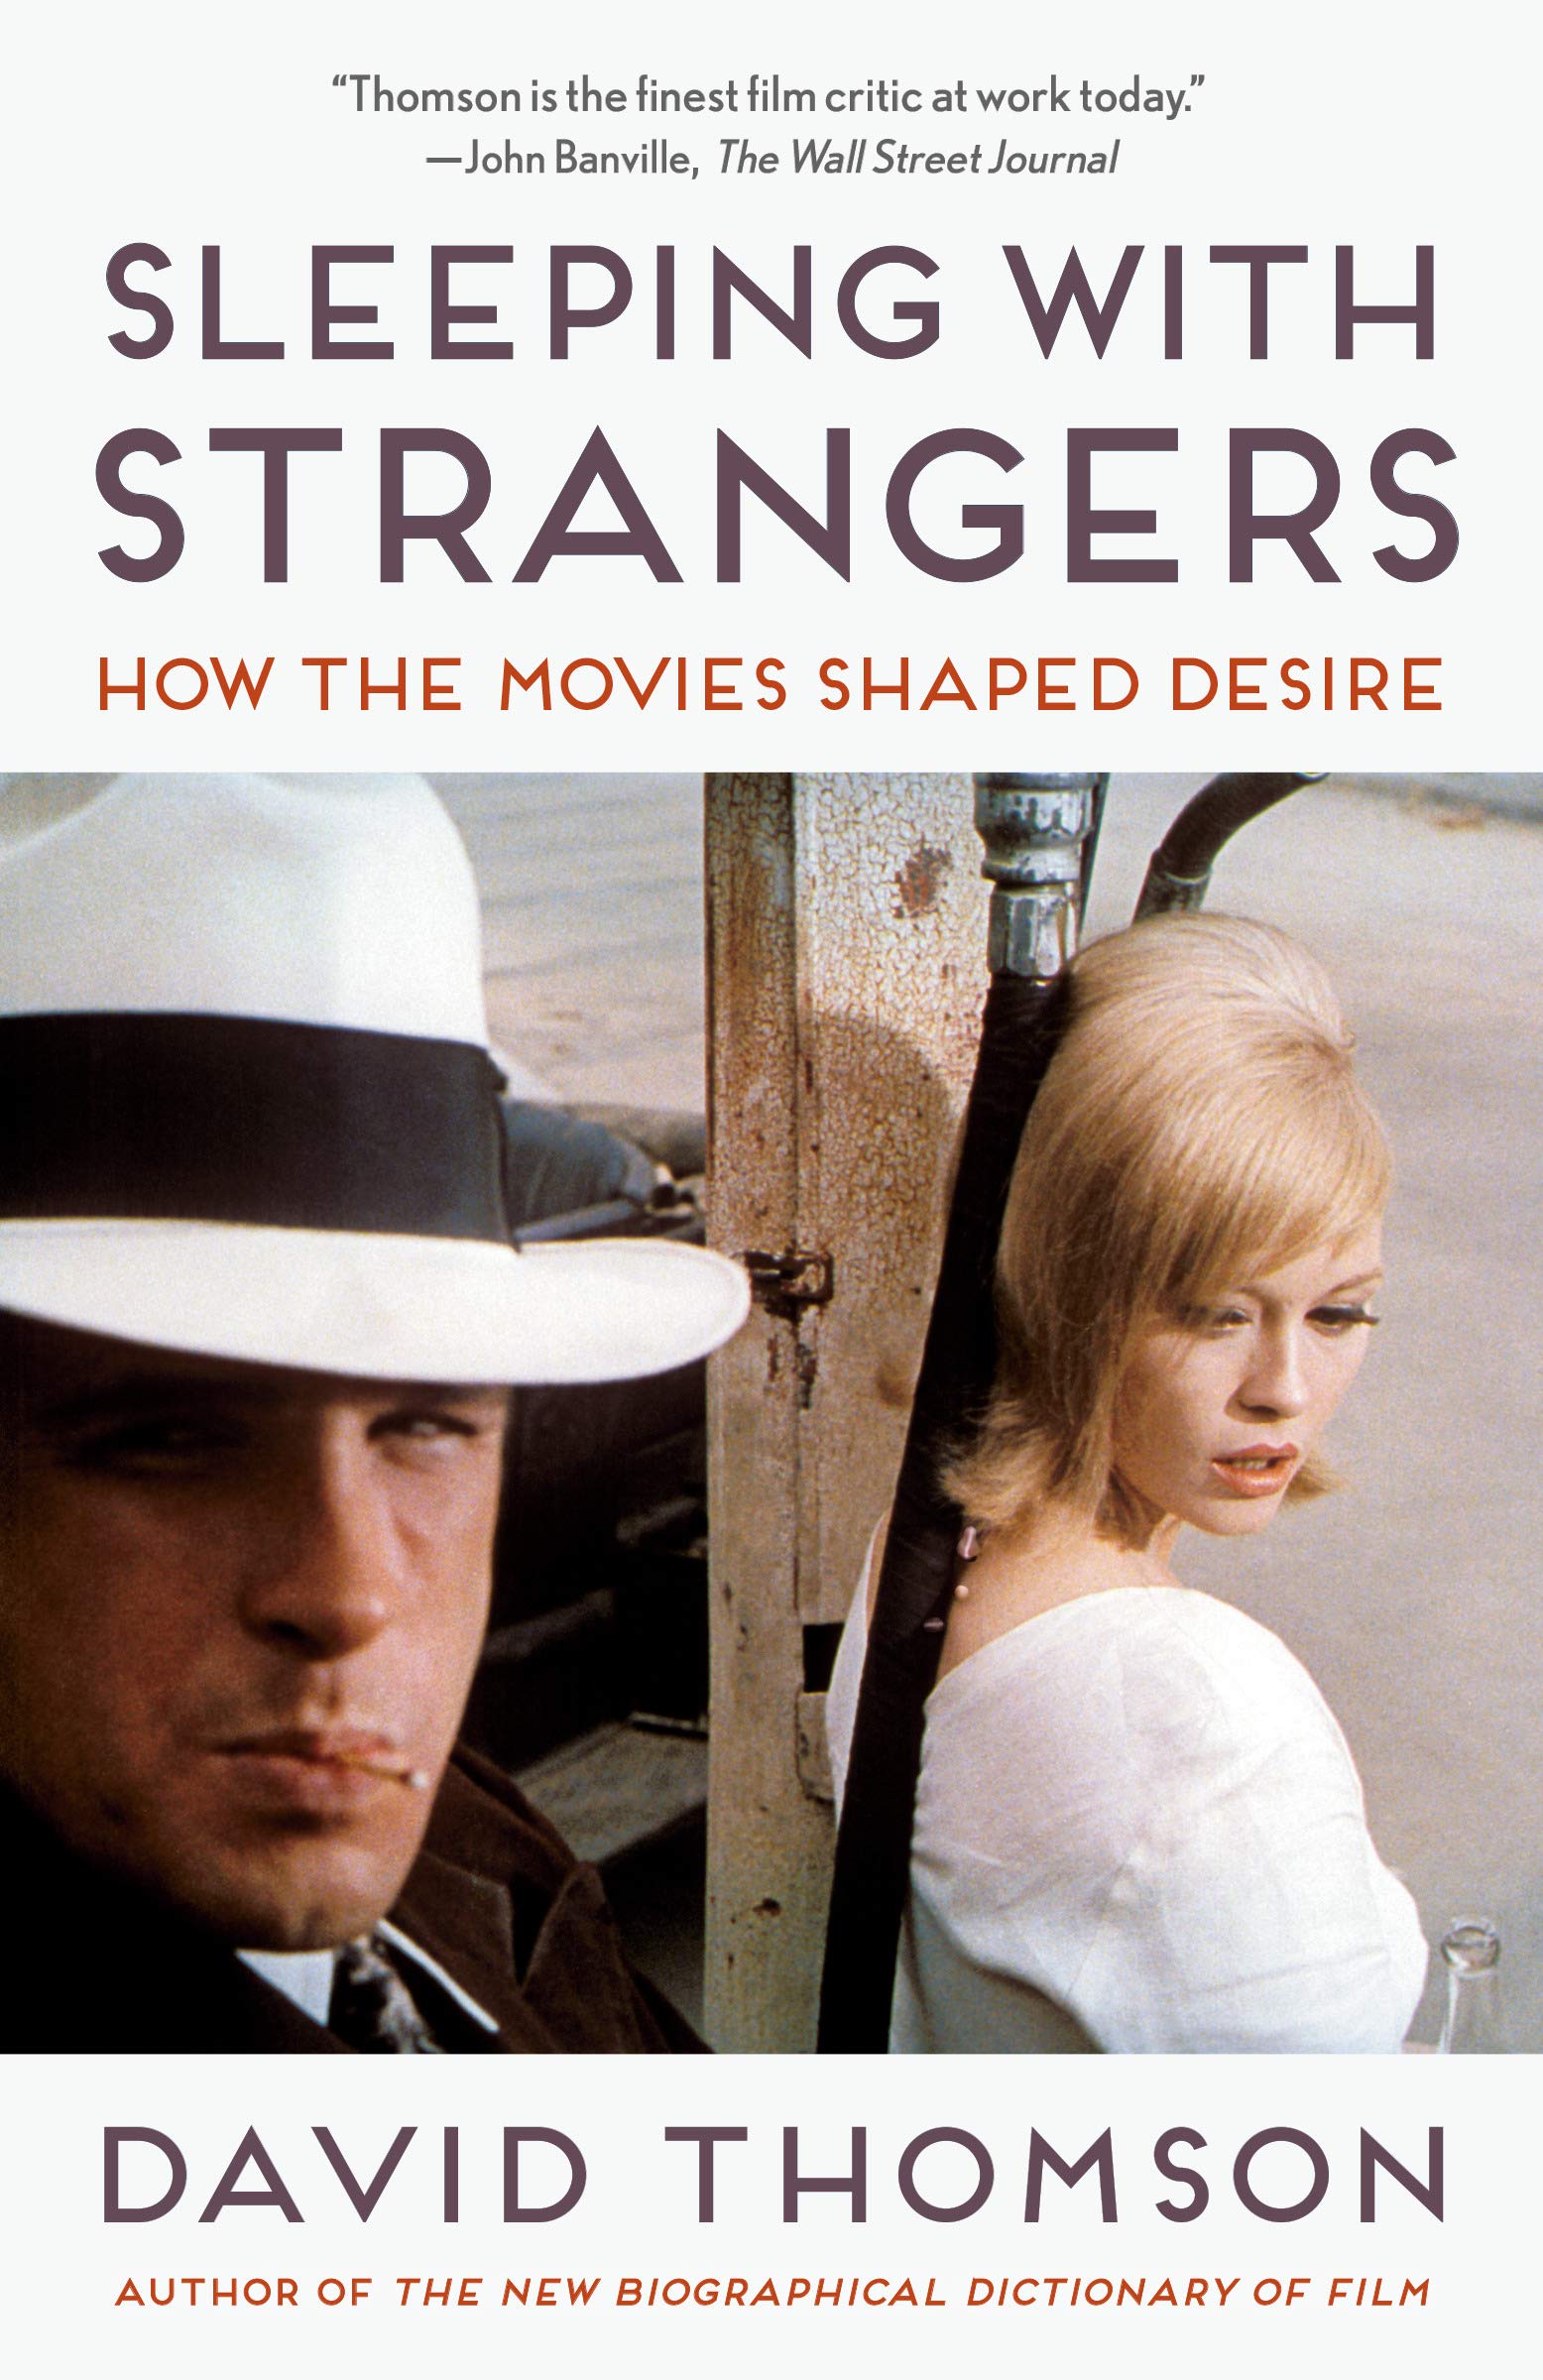 Sleeping with Strangers' by David Thomson: In Great Company